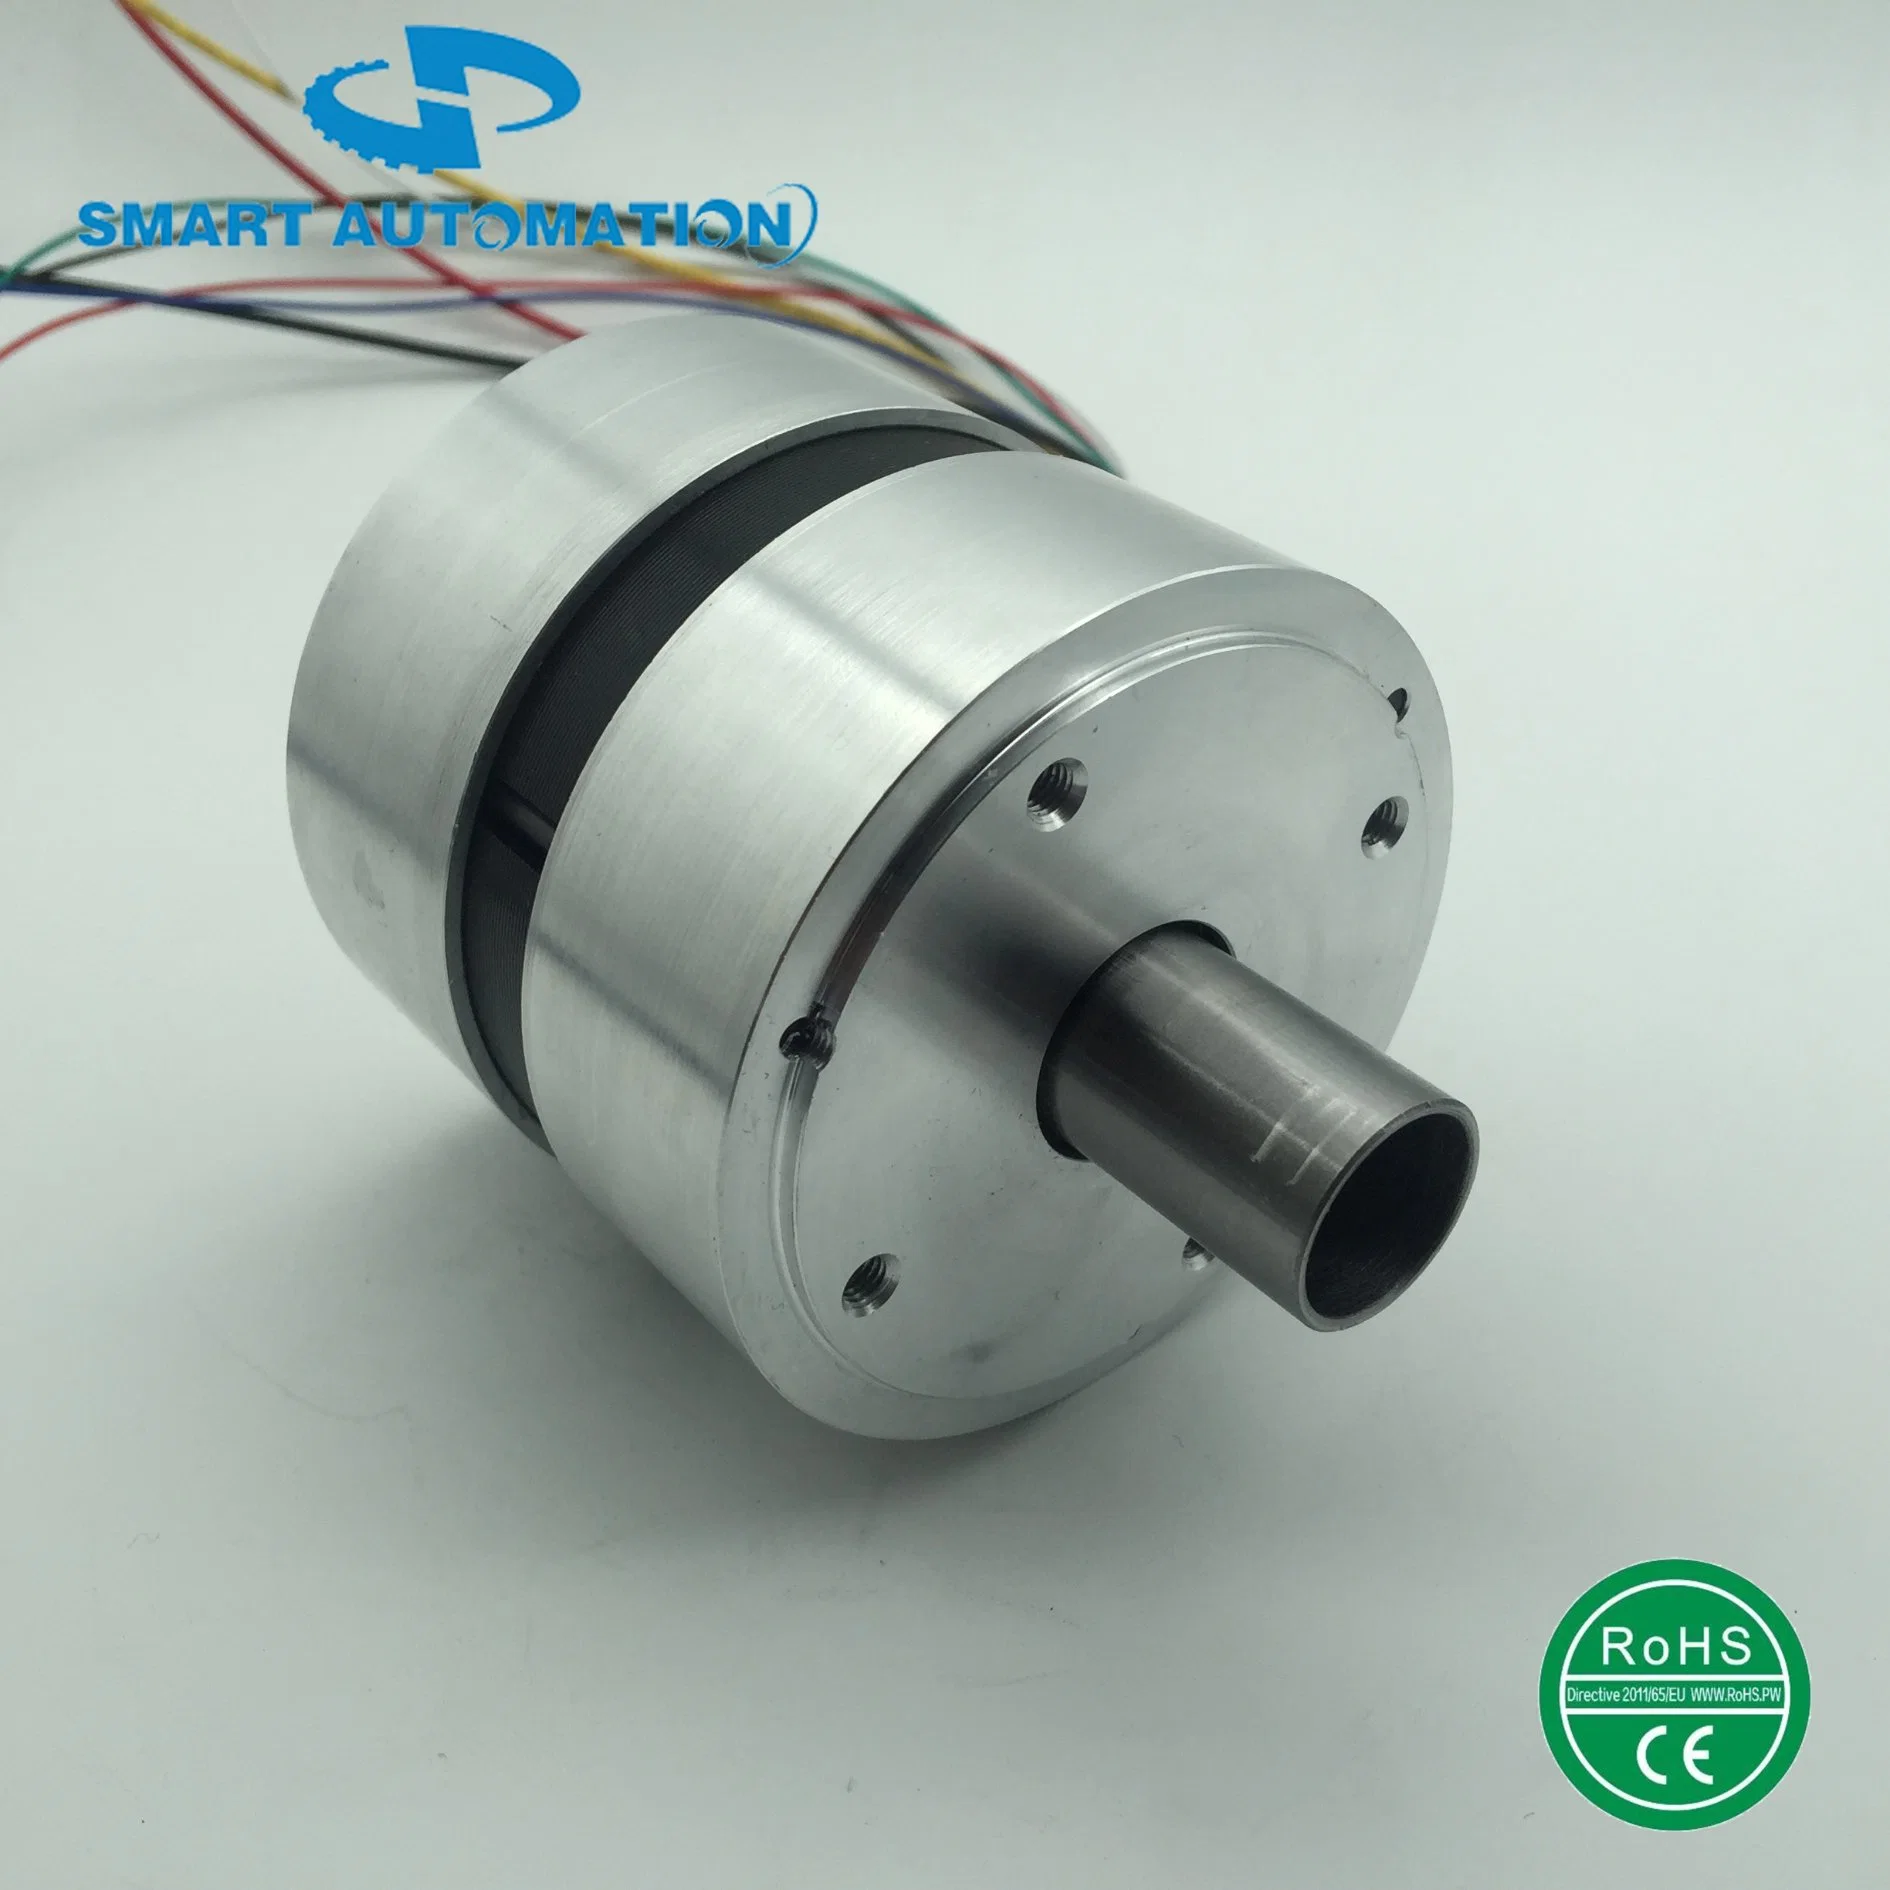 Custom Brush or Brushless off-Road Electric Vehicle DC Motor for Automatic Engineering Car Wheelchair E-Bike E-Scooter Golf Cart Agv Go-Kart Sledge and Walker